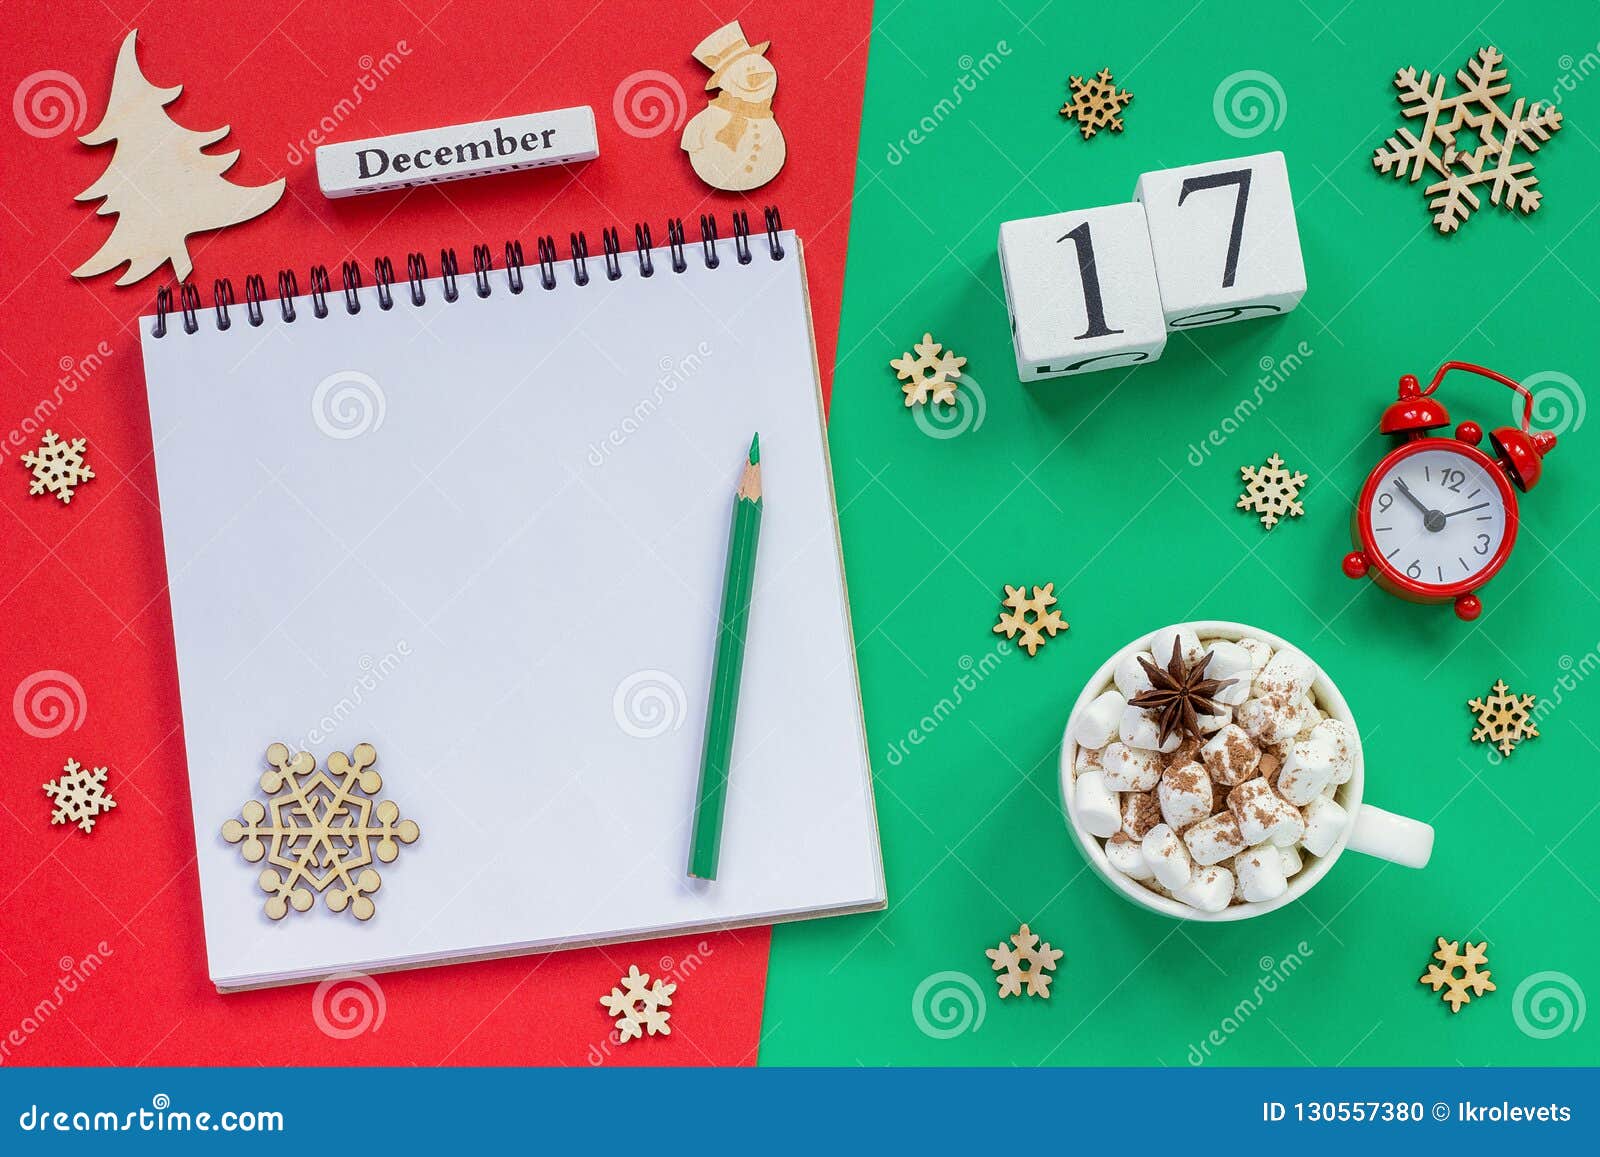 calendar december 17th cup cocoa and marshmallow, empty open notepad